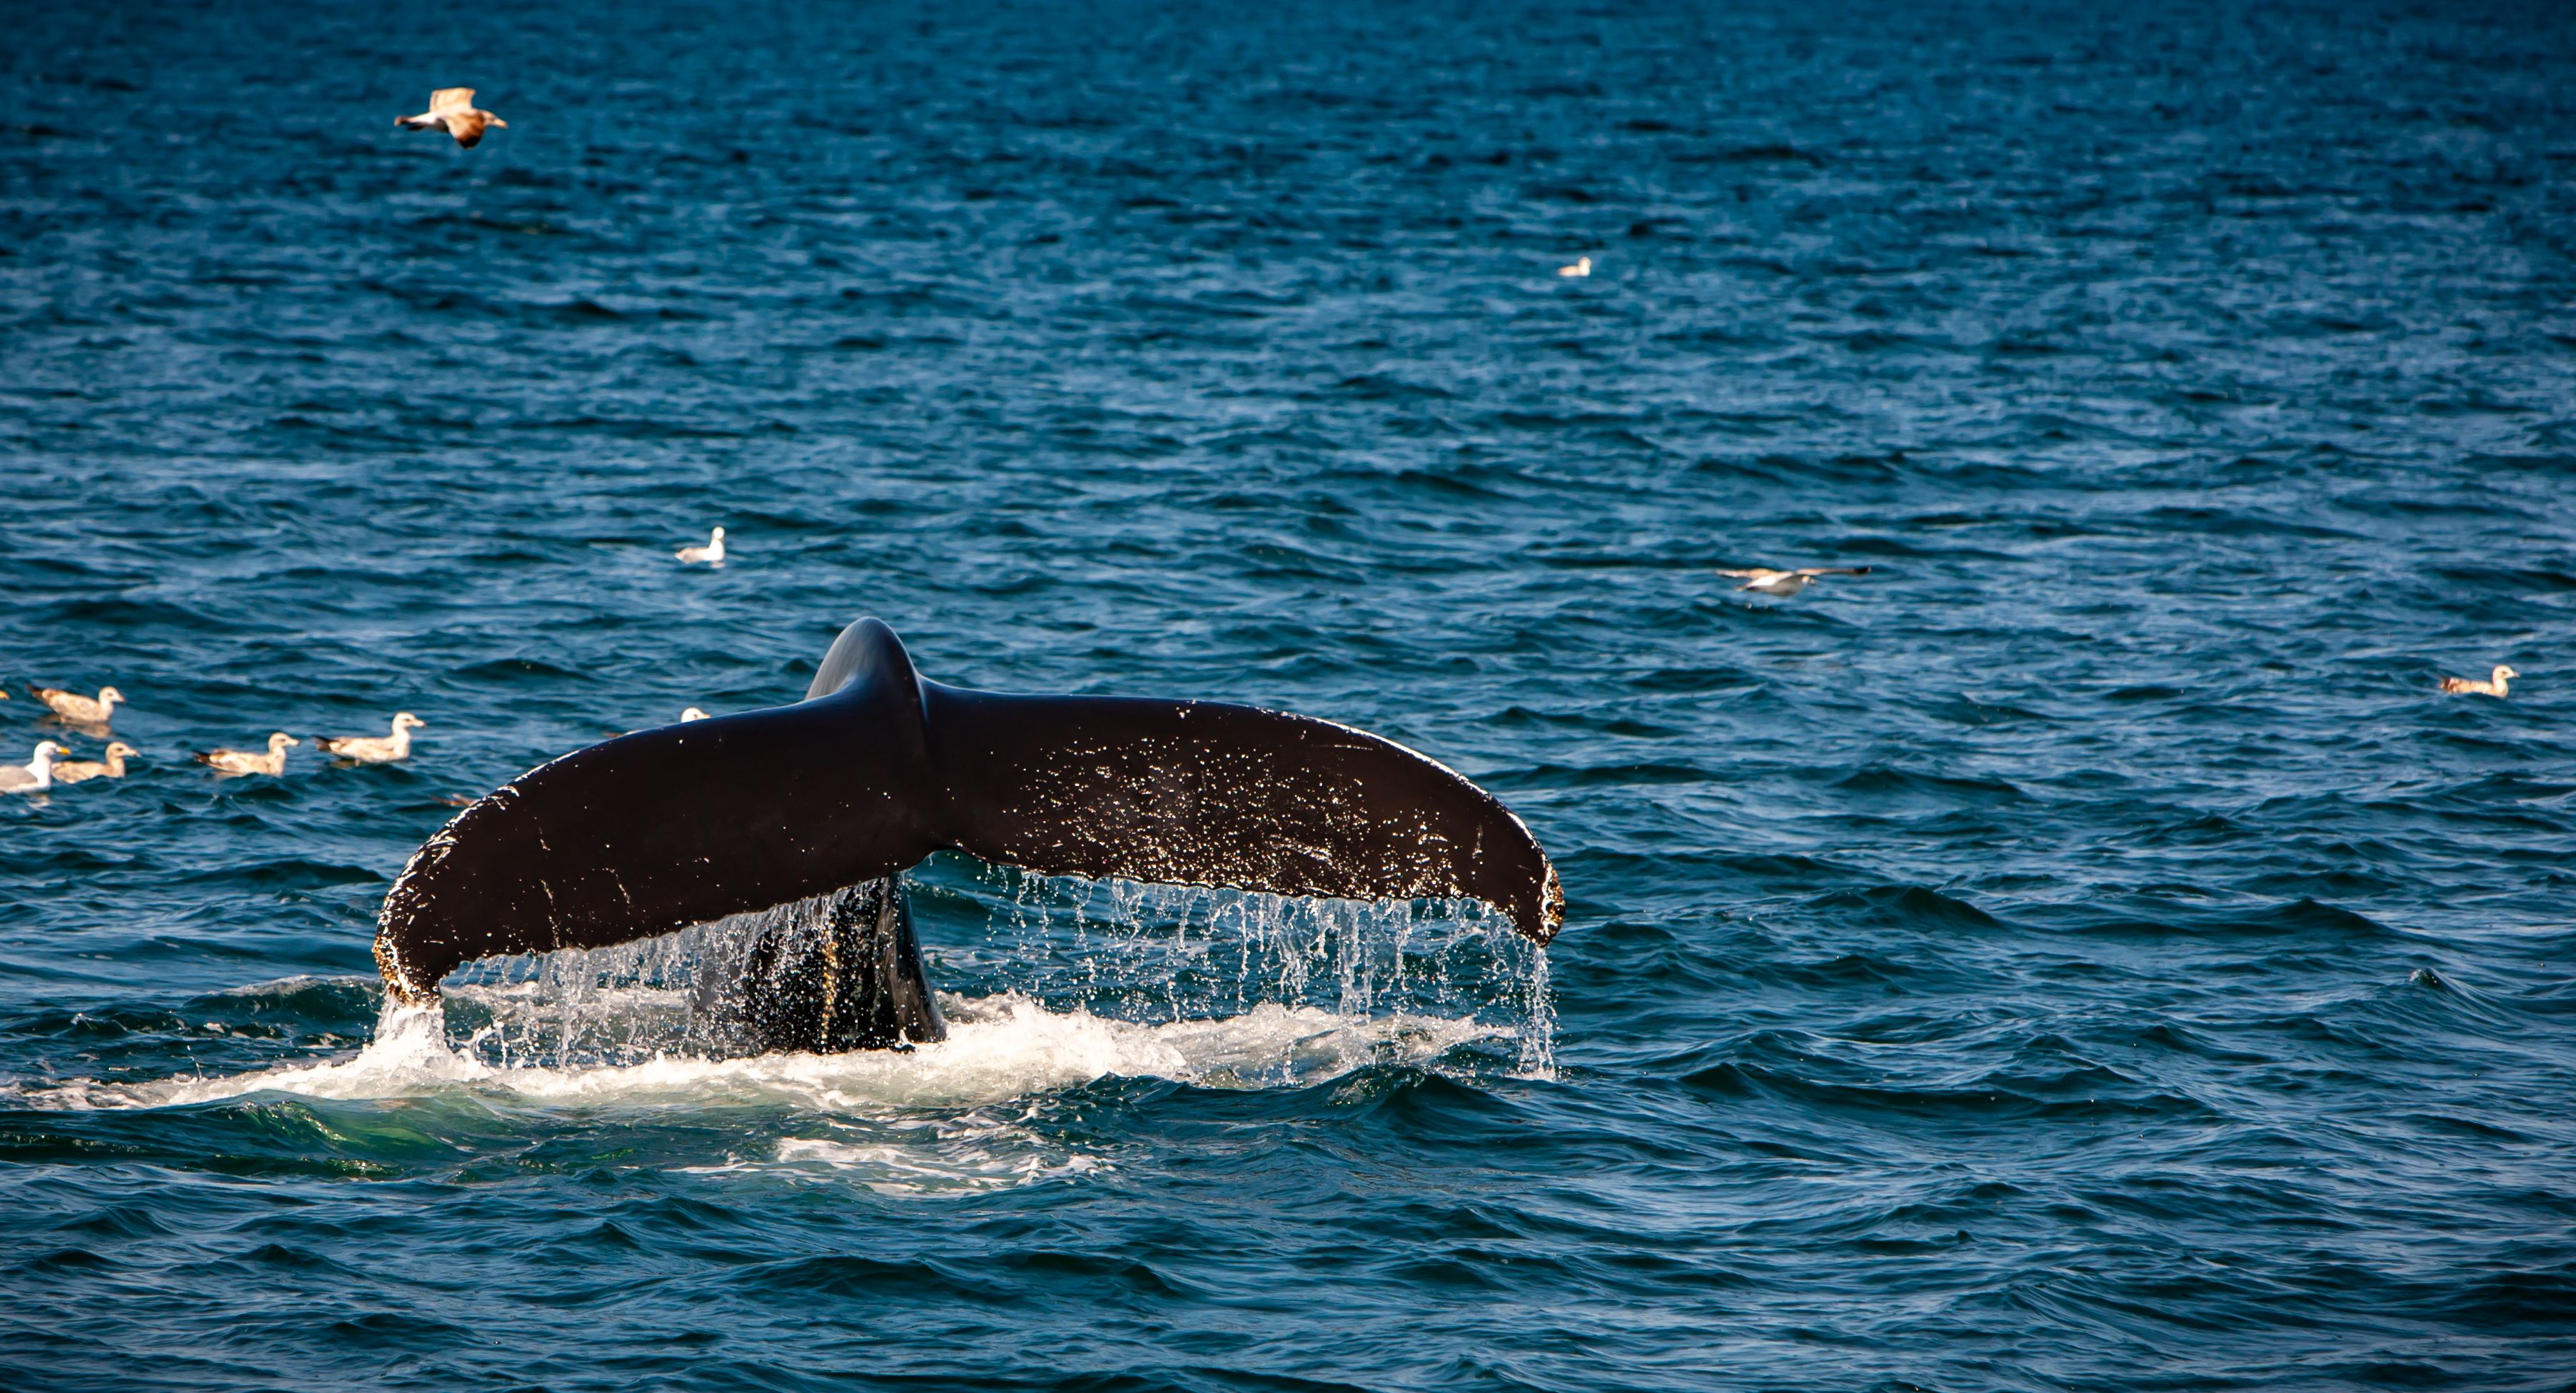 The tale of a Right Whale in the ocean off the coast of Cape Cod. Image by Jima Madigan / Shutterstock. United States, undated.

